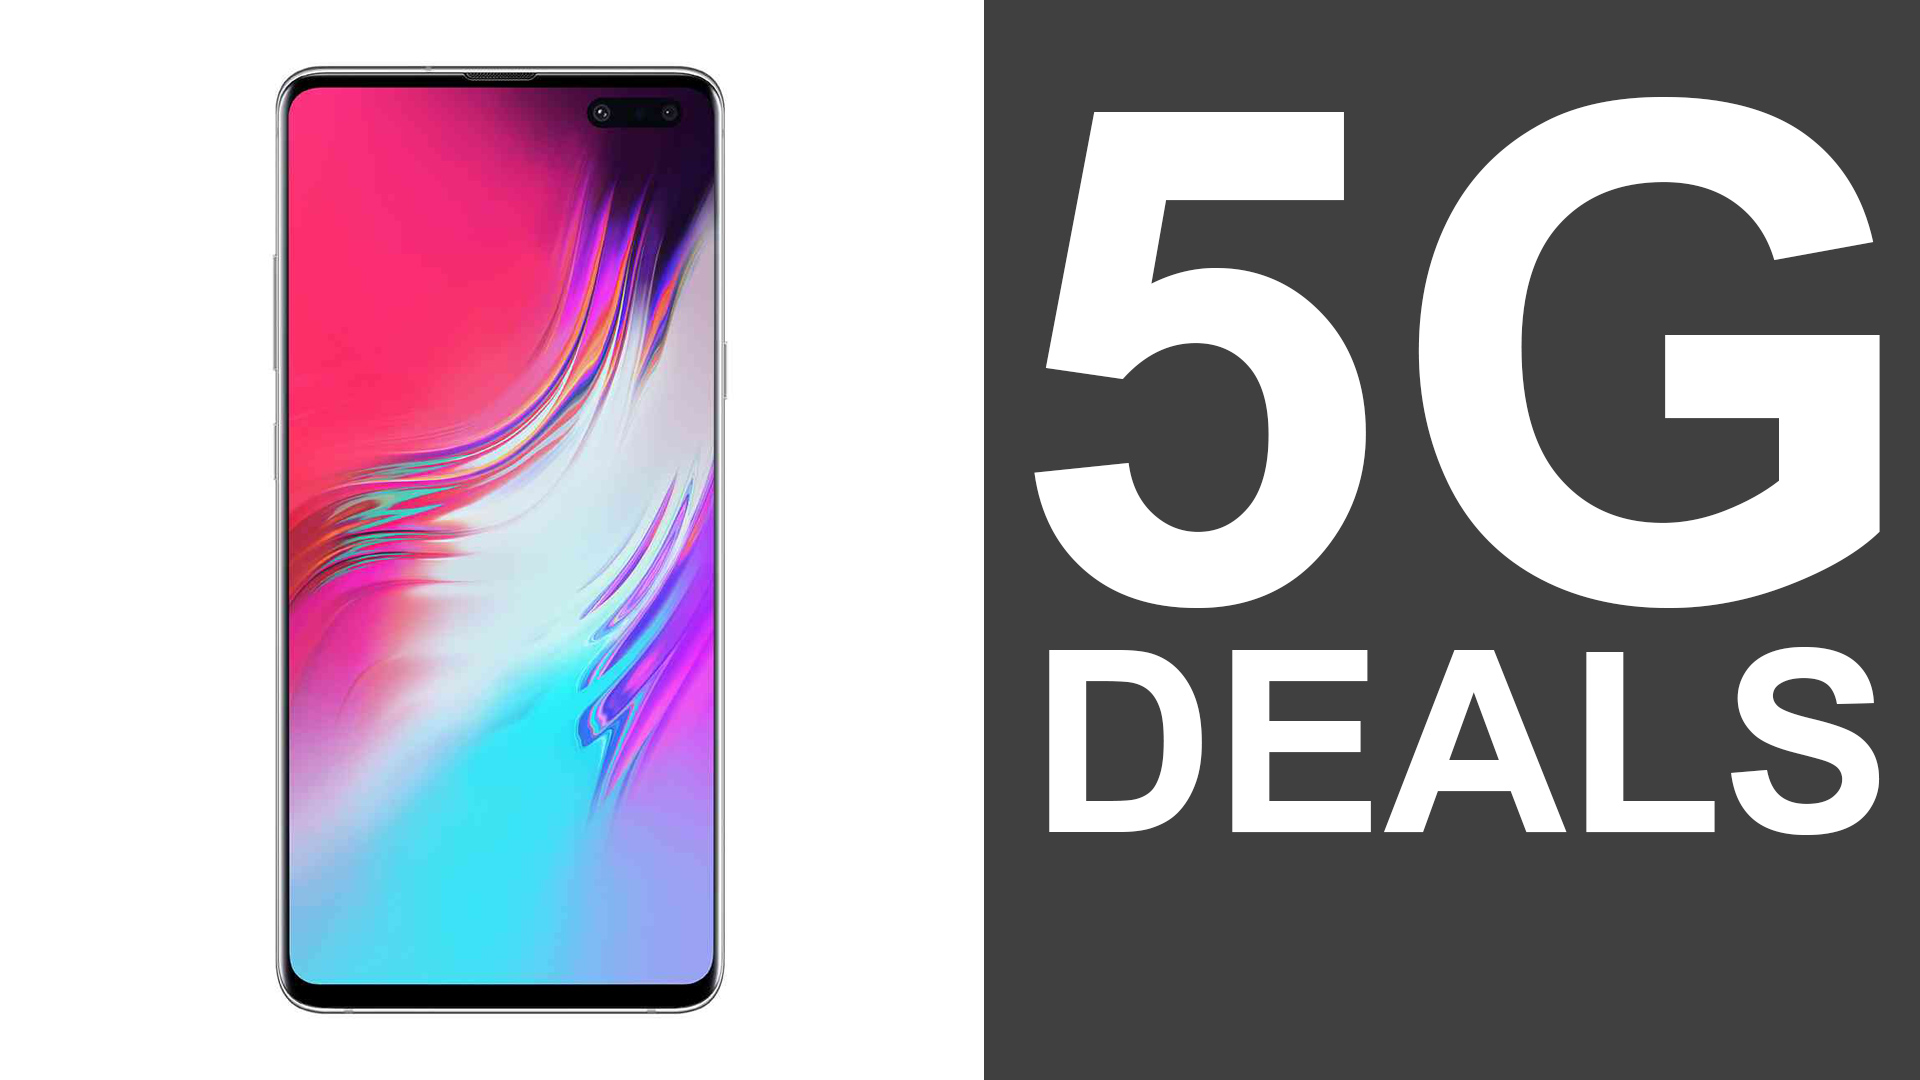 5G Deals: View Our Best 5G Phone Deals & Prices